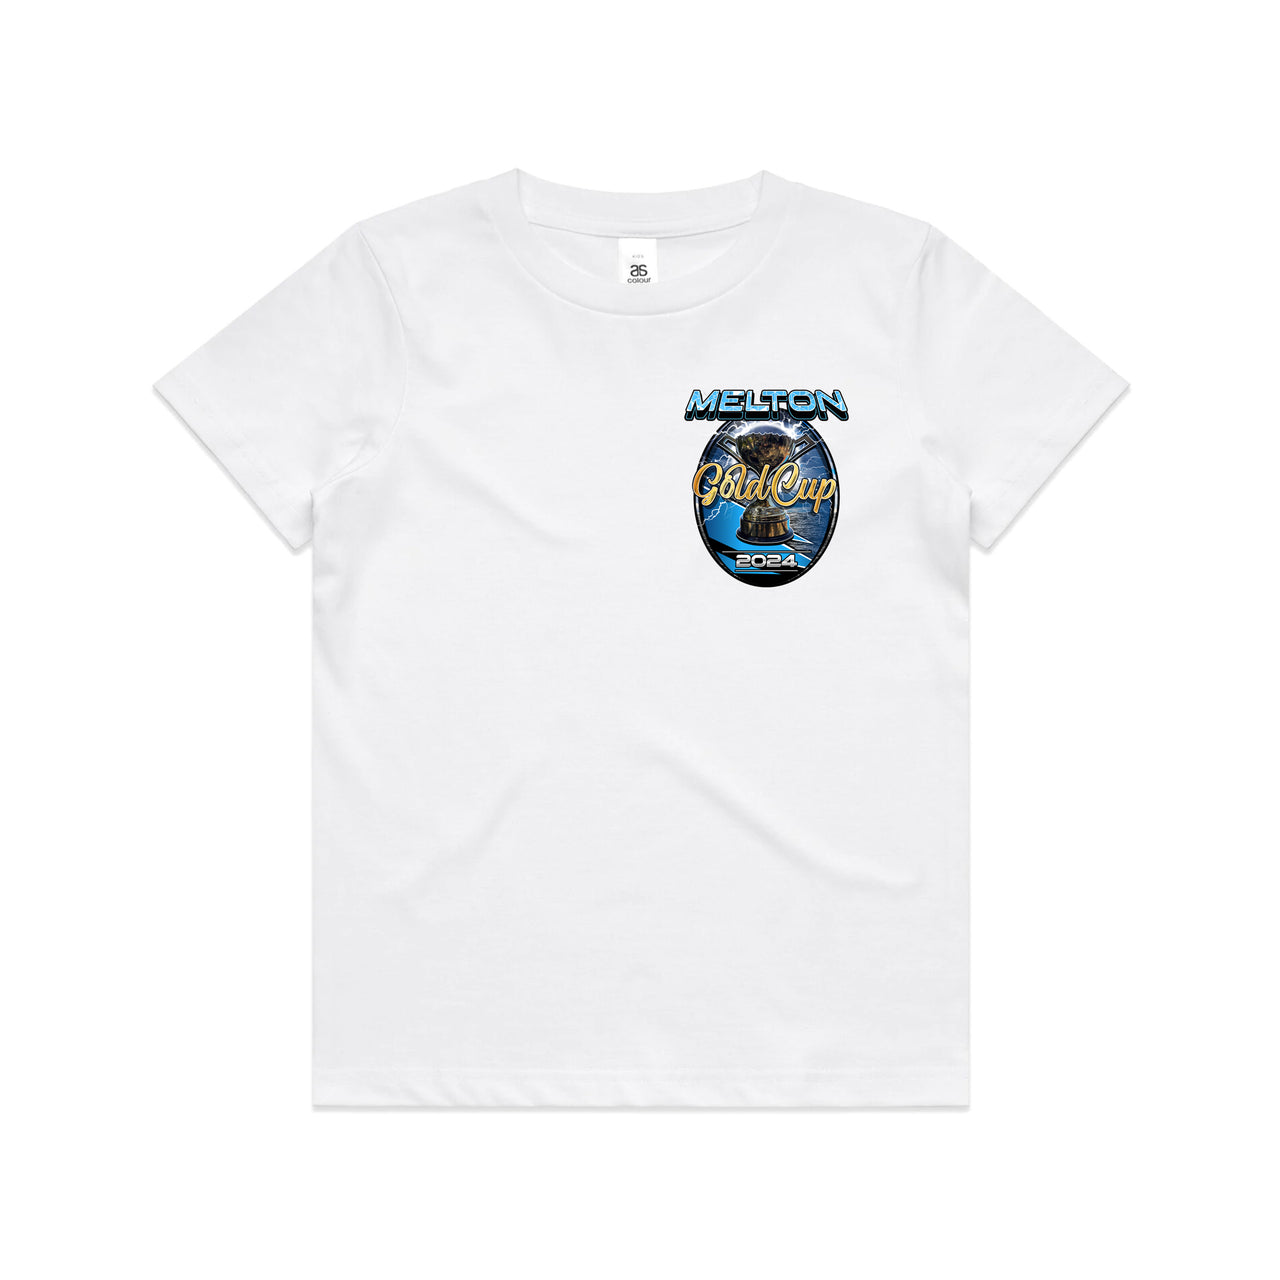 Melton Gold Cup 2024 Youth/Kids Tee